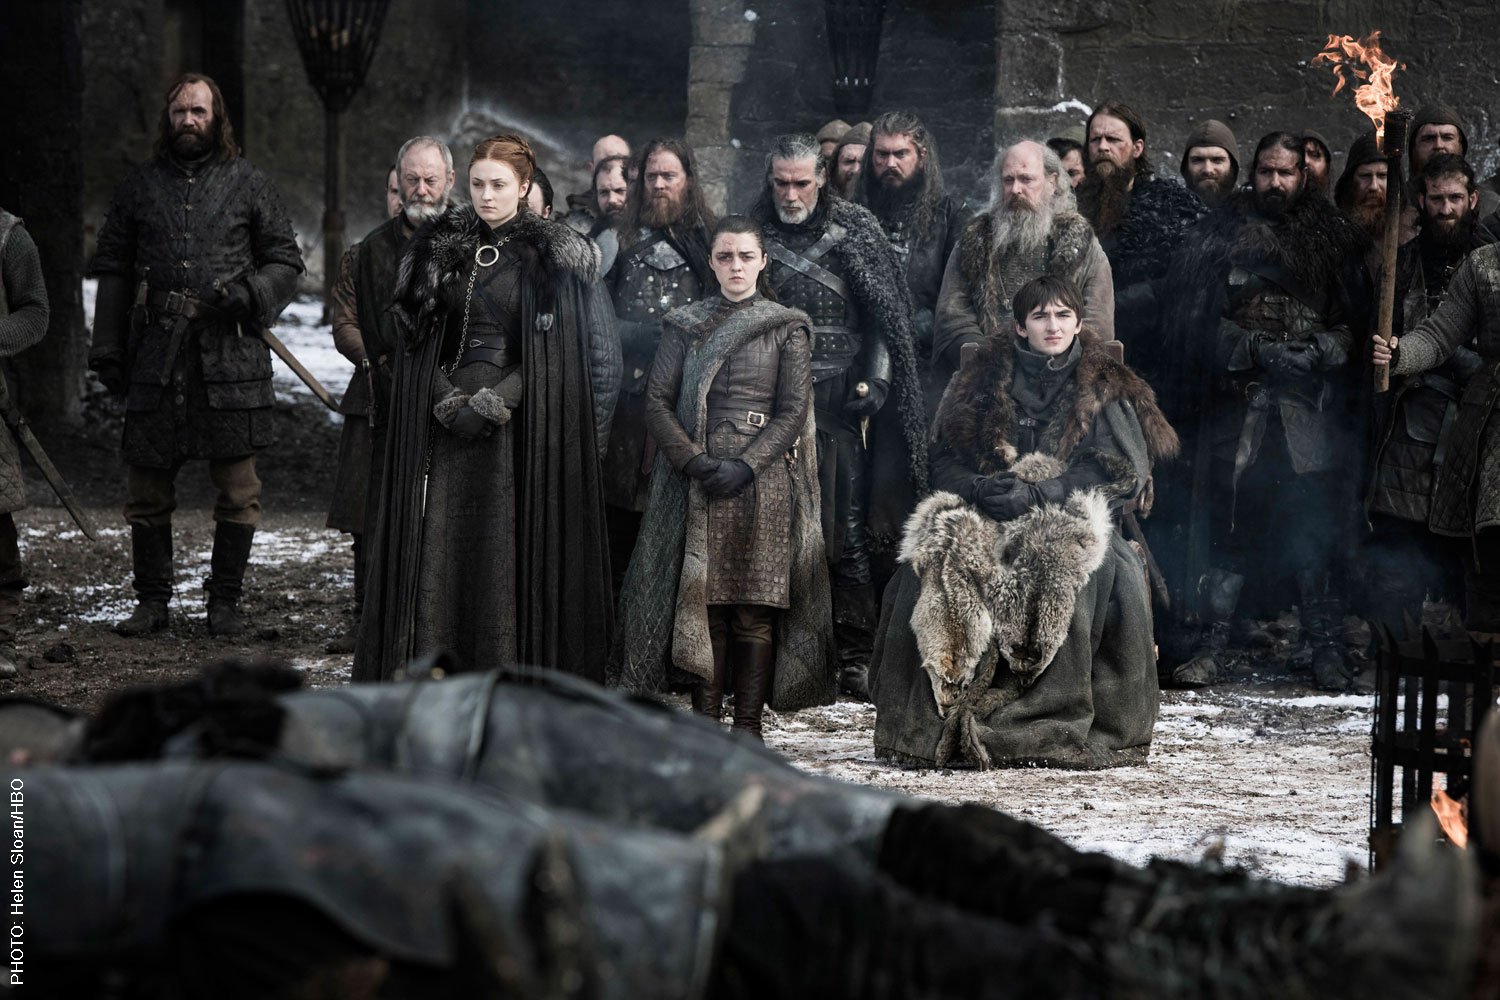 The Game of Thrones cast in Season 3, Episode 4